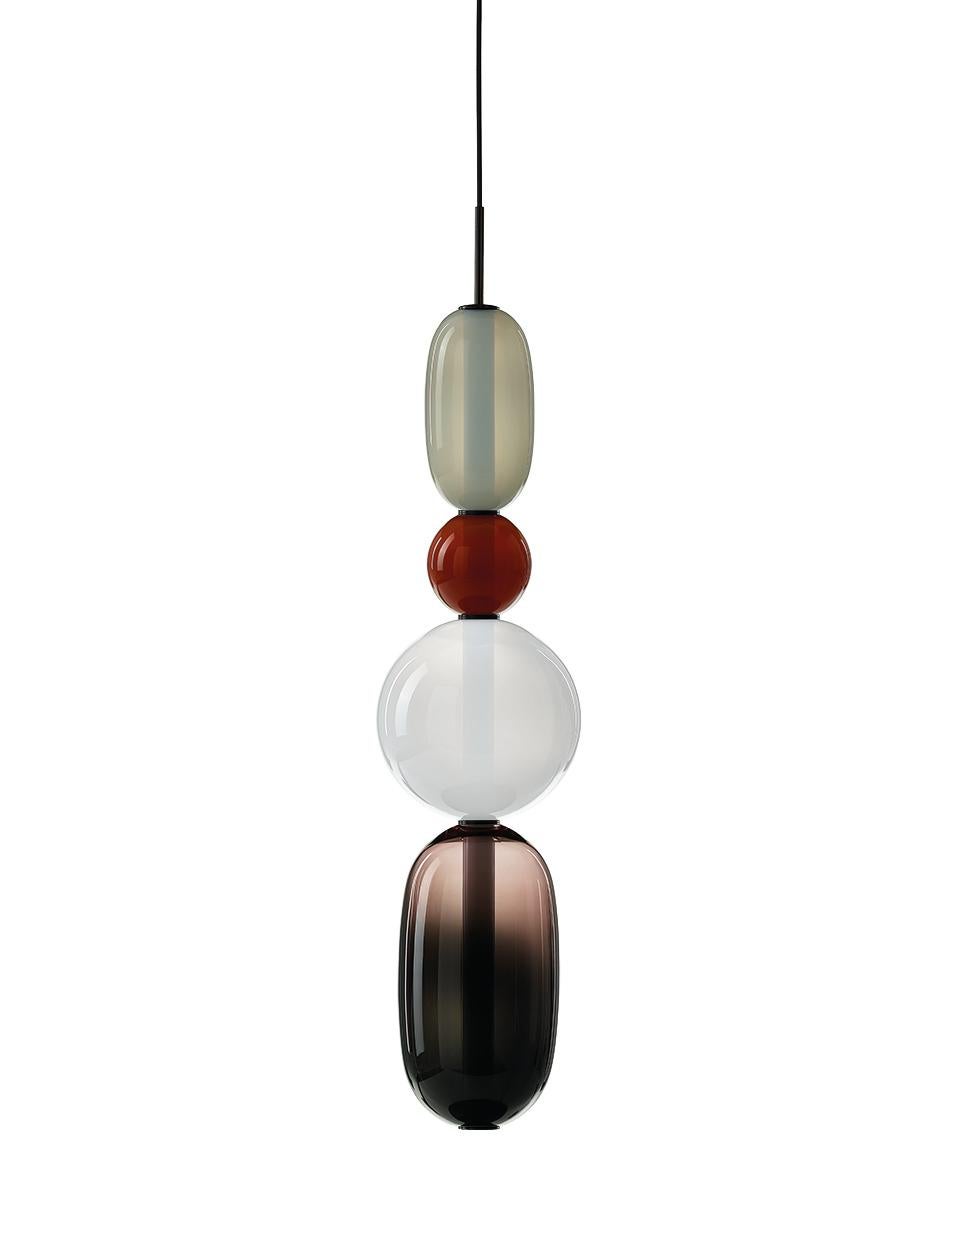 Contemporary blown crystal glass pendant - pebbles by Boris Klimek for Bomma

Pebbles are reminders of exceptional moments or favorite places. Their diverse shapes and colors inspired BOMMA’s playful collection that invites you to express your